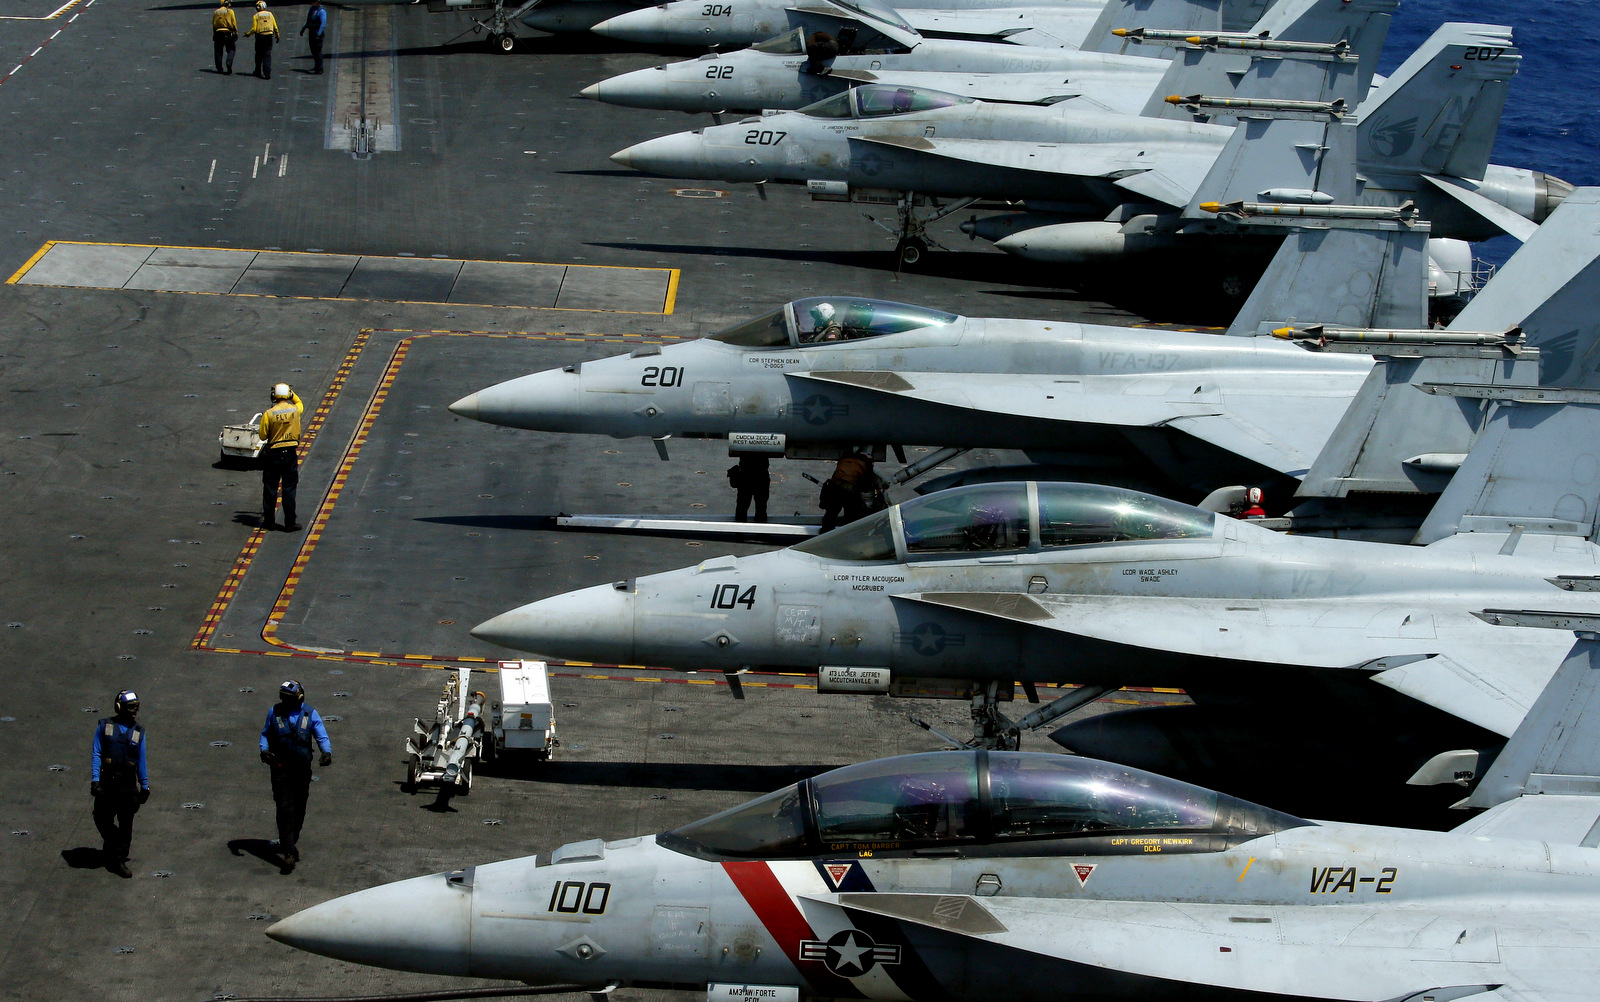 A row of F18 fighter jets on the deck of the U.S. Navy aircraft carrier USS Carl Vinson (CVN 70) is prepared for patrols off the disputed South China Sea Friday, March 3, 2017. The U.S. military took journalists Friday to the carrier on routine patrol off the disputed South China Sea, sending a signal to China and American allies of its resolve to ensure freedom of navigation and overflight in one of the world's security hotspots.(AP Photo/Bullit Marquez)